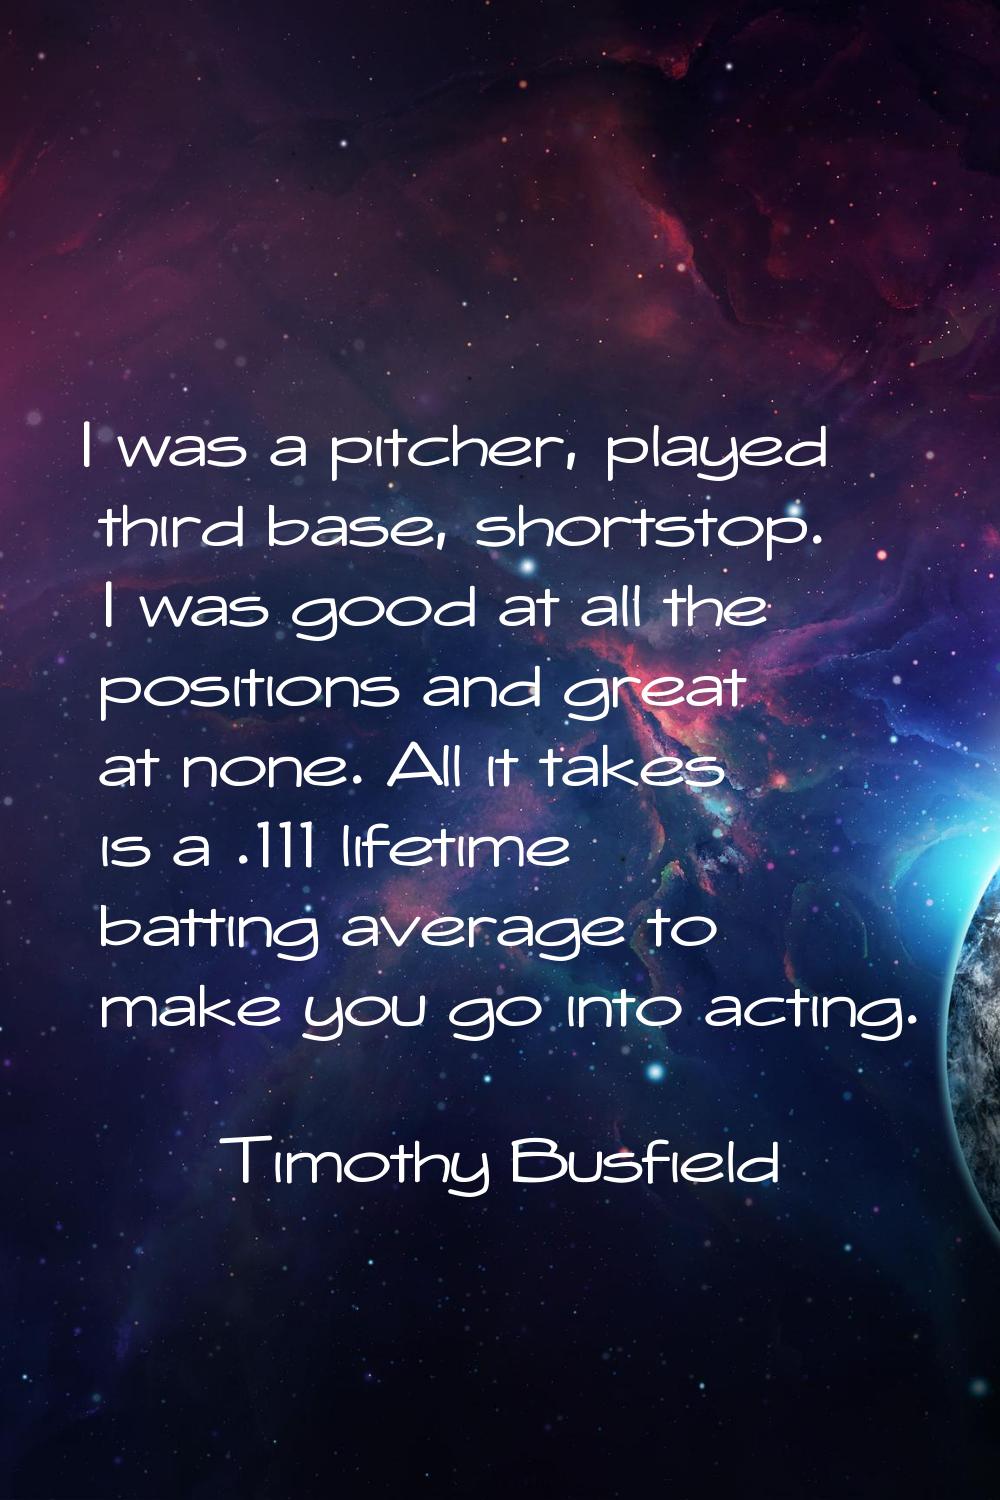 I was a pitcher, played third base, shortstop. I was good at all the positions and great at none. A